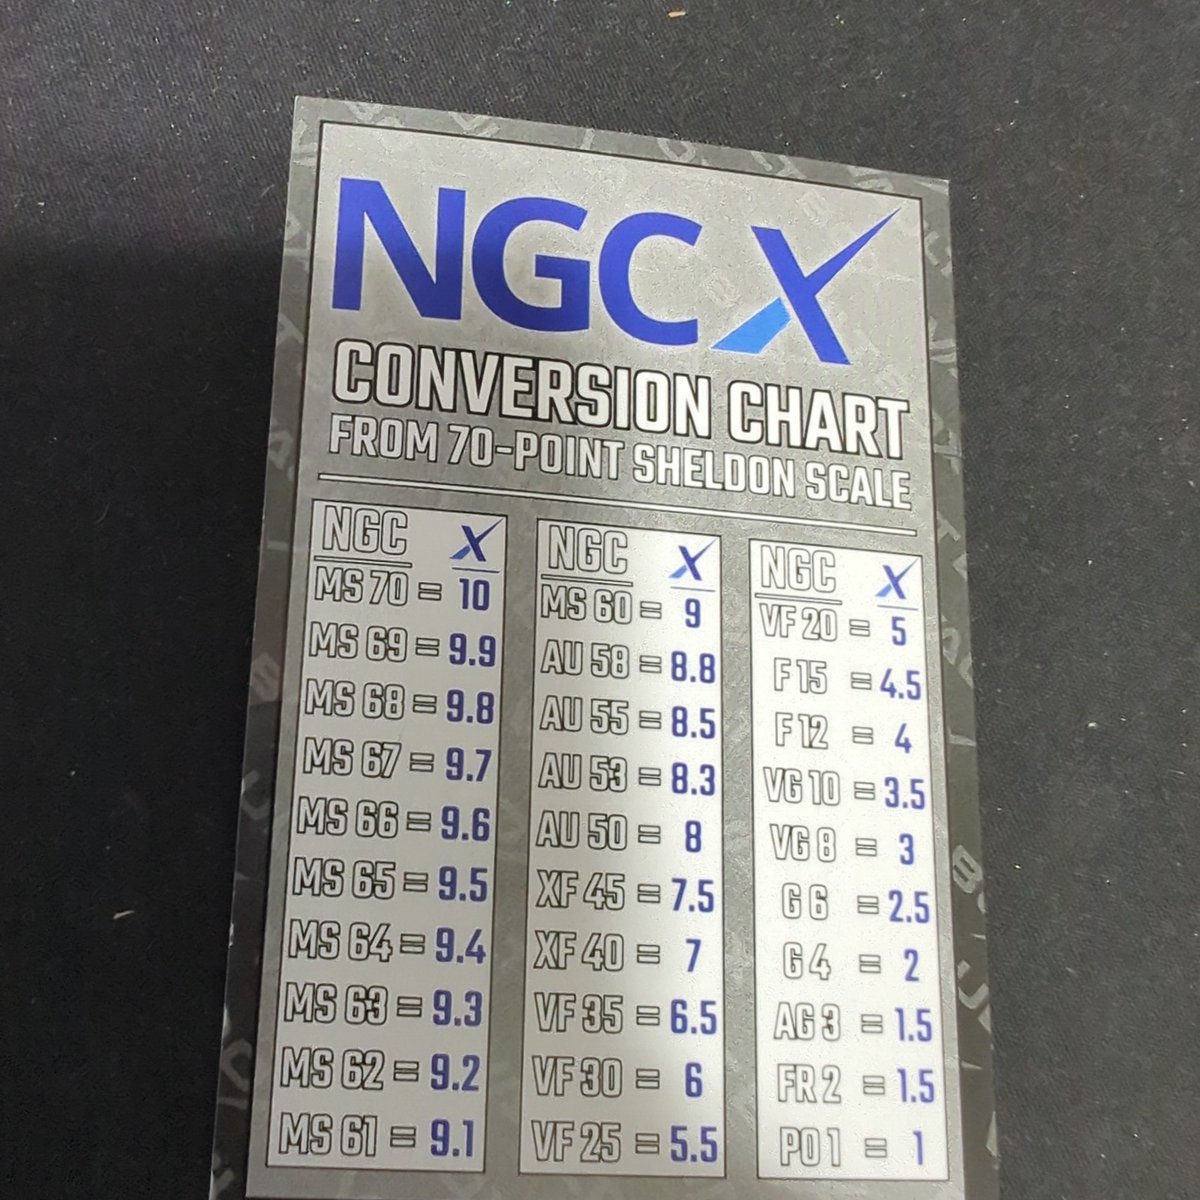 Am I the only one that has a problem with the new @NGCcoin ngcx grading scale? I mean, I like the new 1-10 but come on, you need to differentiate FR2-1.5 from AG3-1.5 for the low ball sets, having so much room and you left those two the same🤦, 1.3 and 1.6?